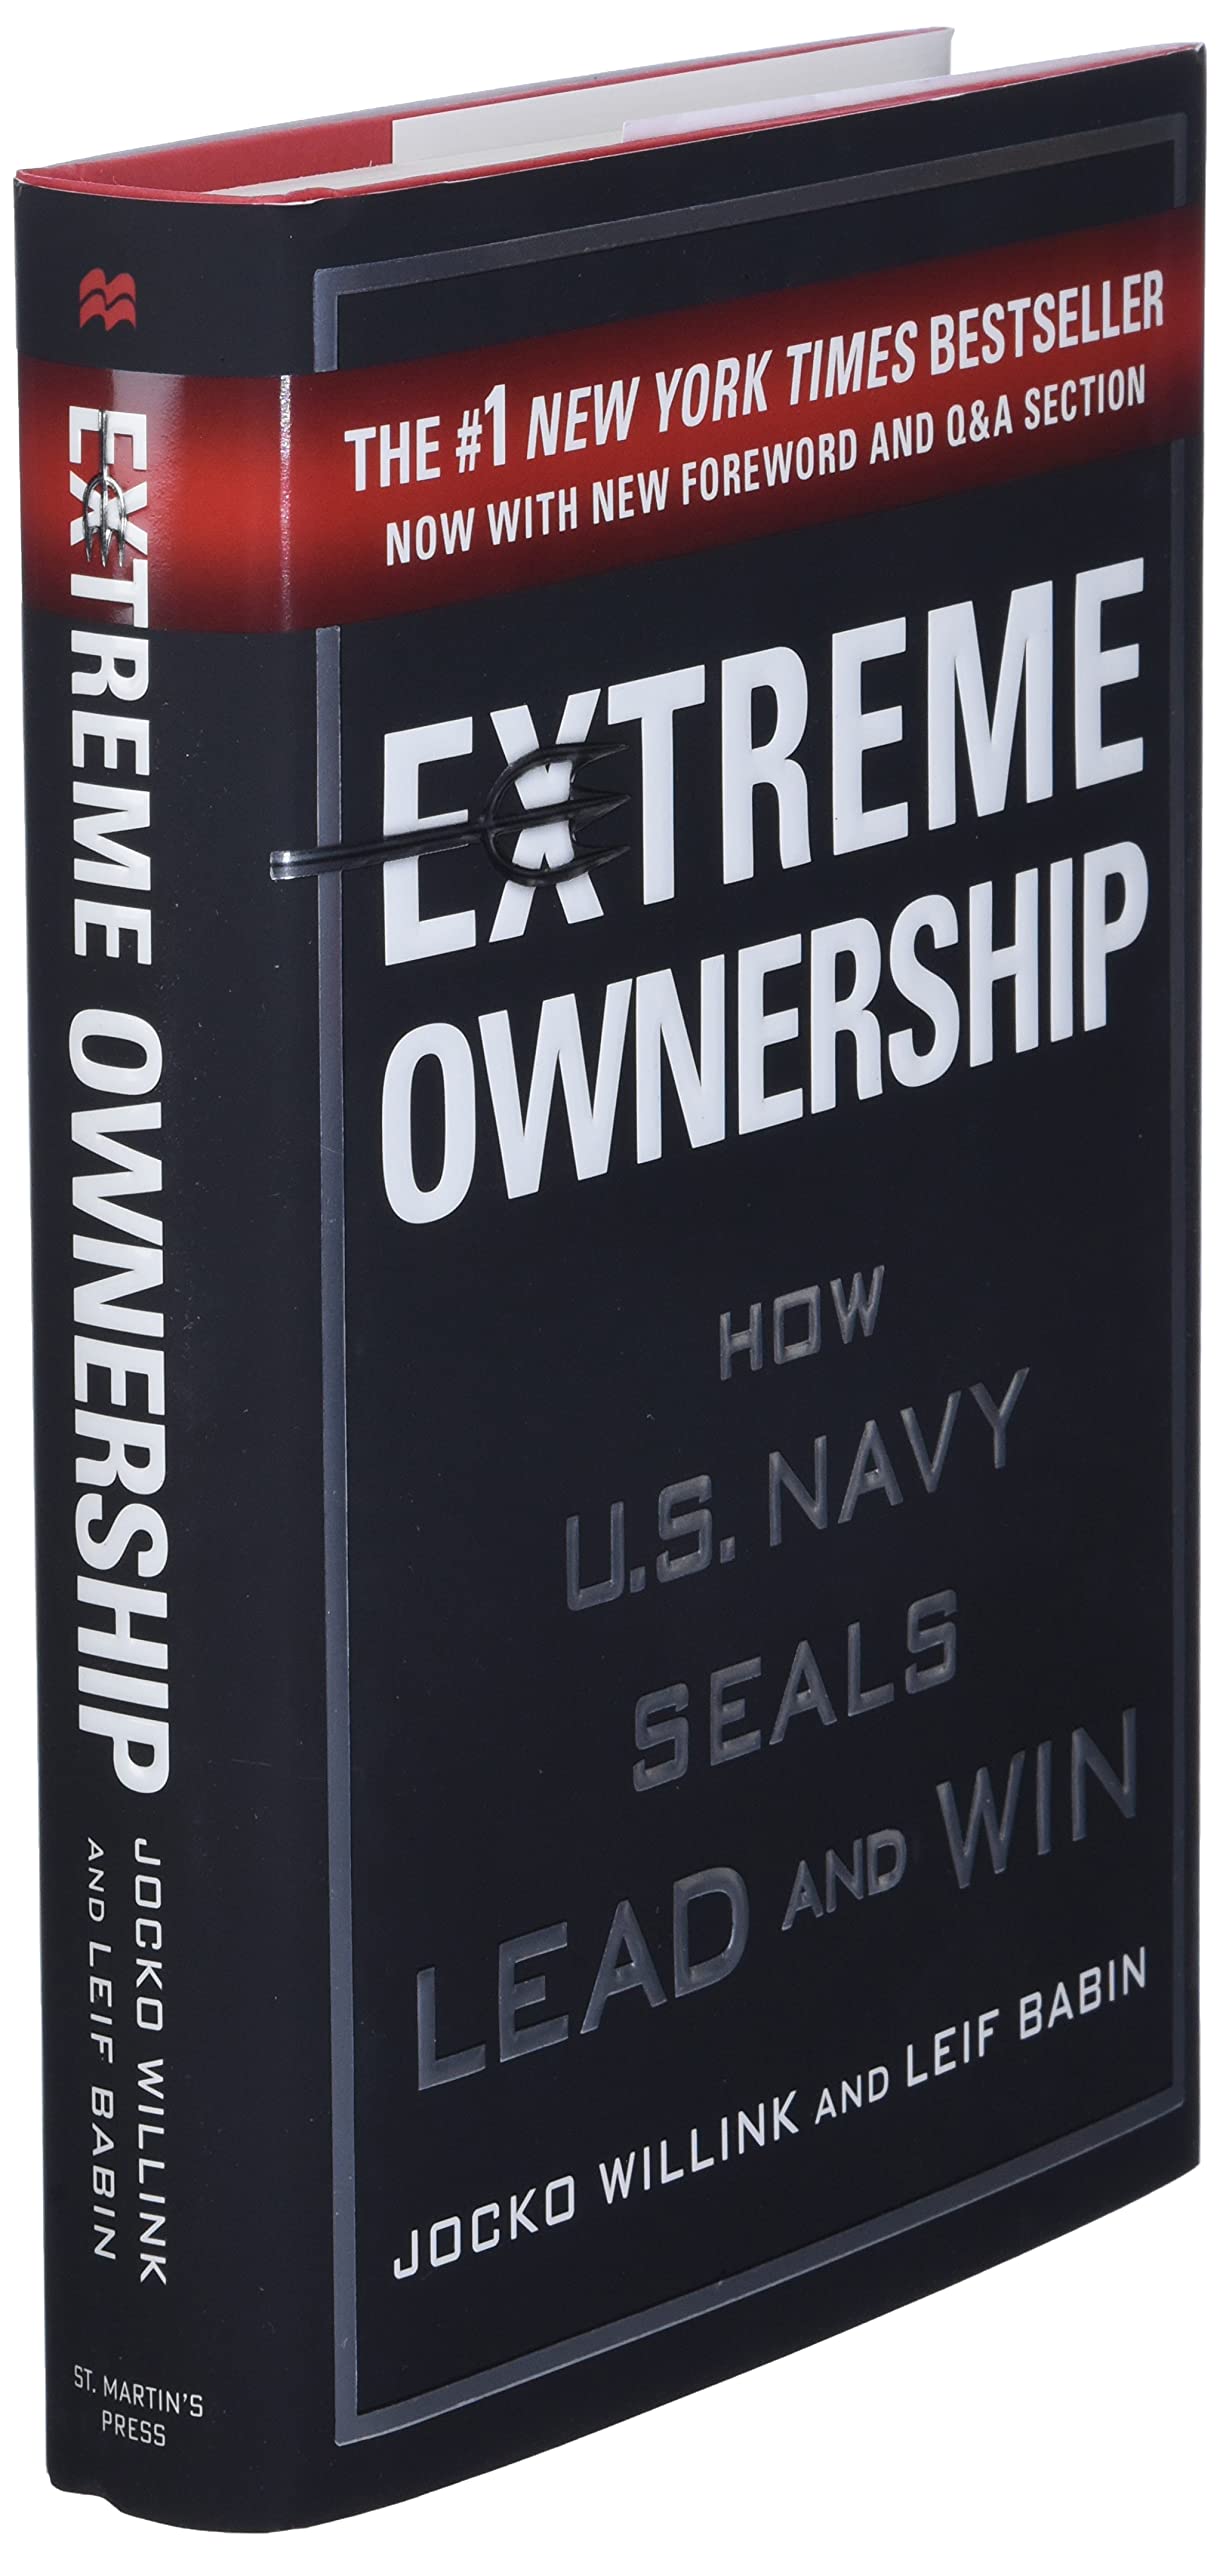 you?　I　How　Ownership　Win　Lead　Navy　Seals　can　and　help　Extreme　How　[Hardcover]